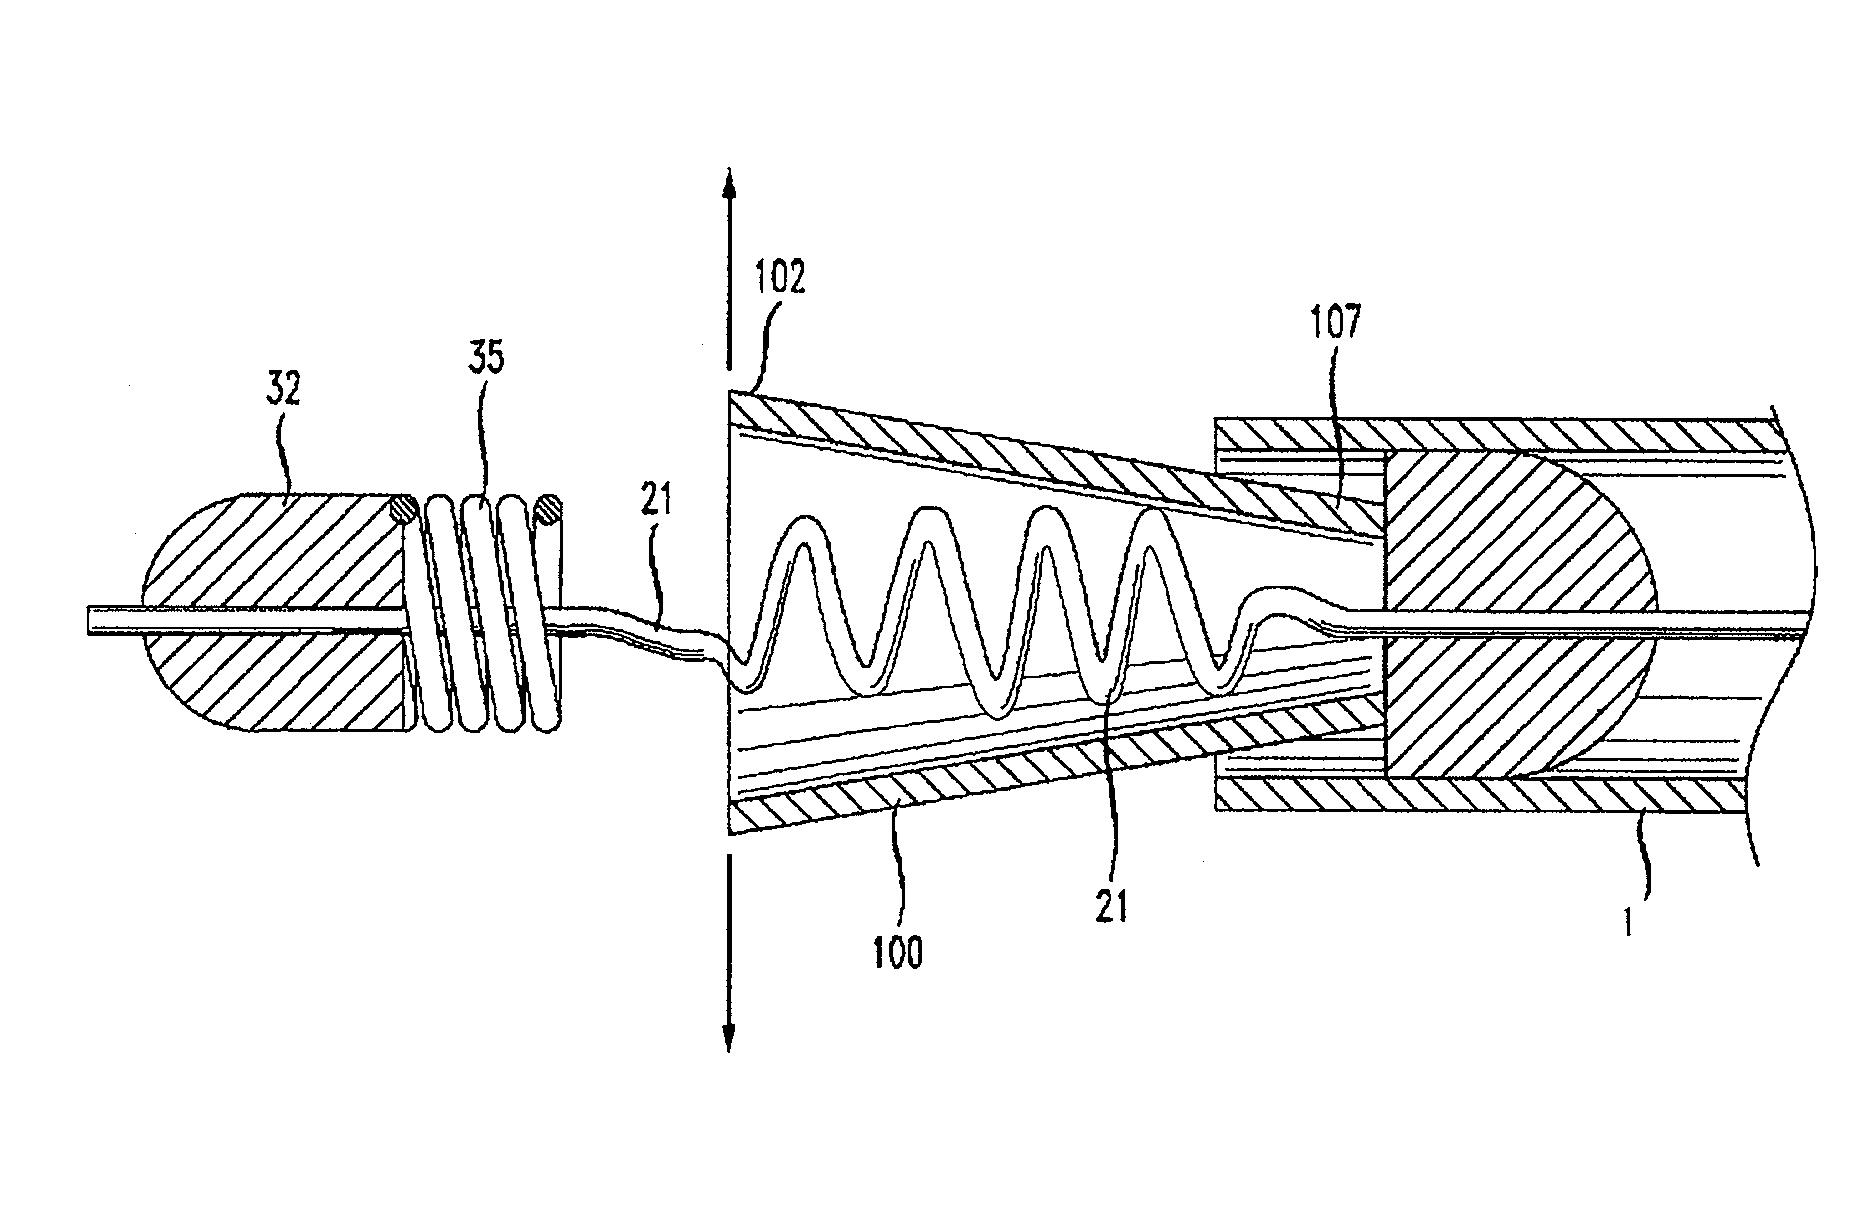 System and method for delivering and deploying an occluding device within a vessel